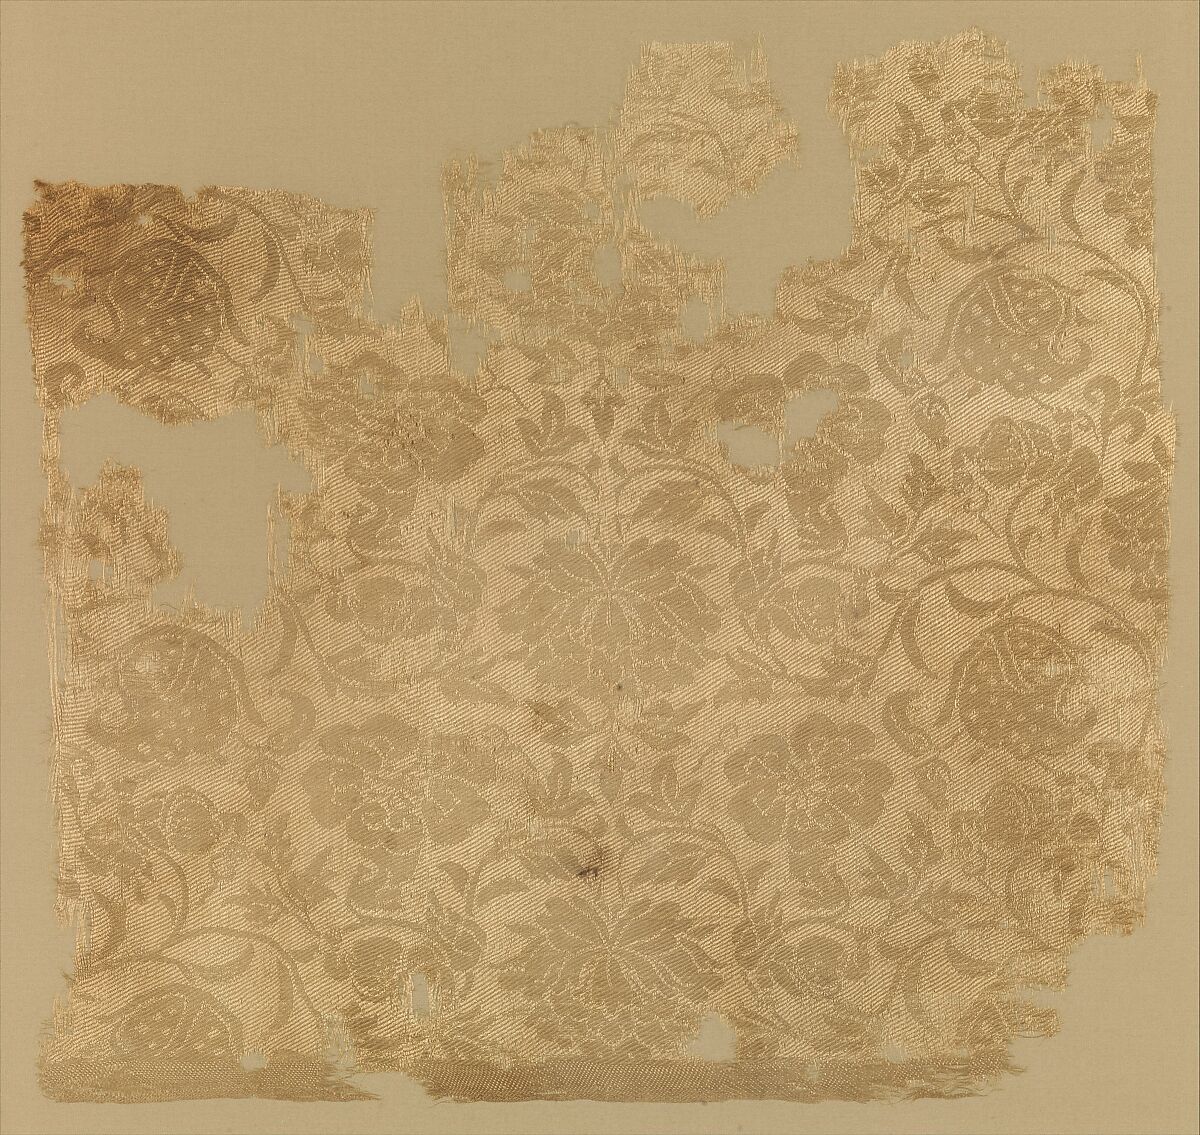 Textile fragment with boys in floral scrolls, Silk twill damask (ling), China 